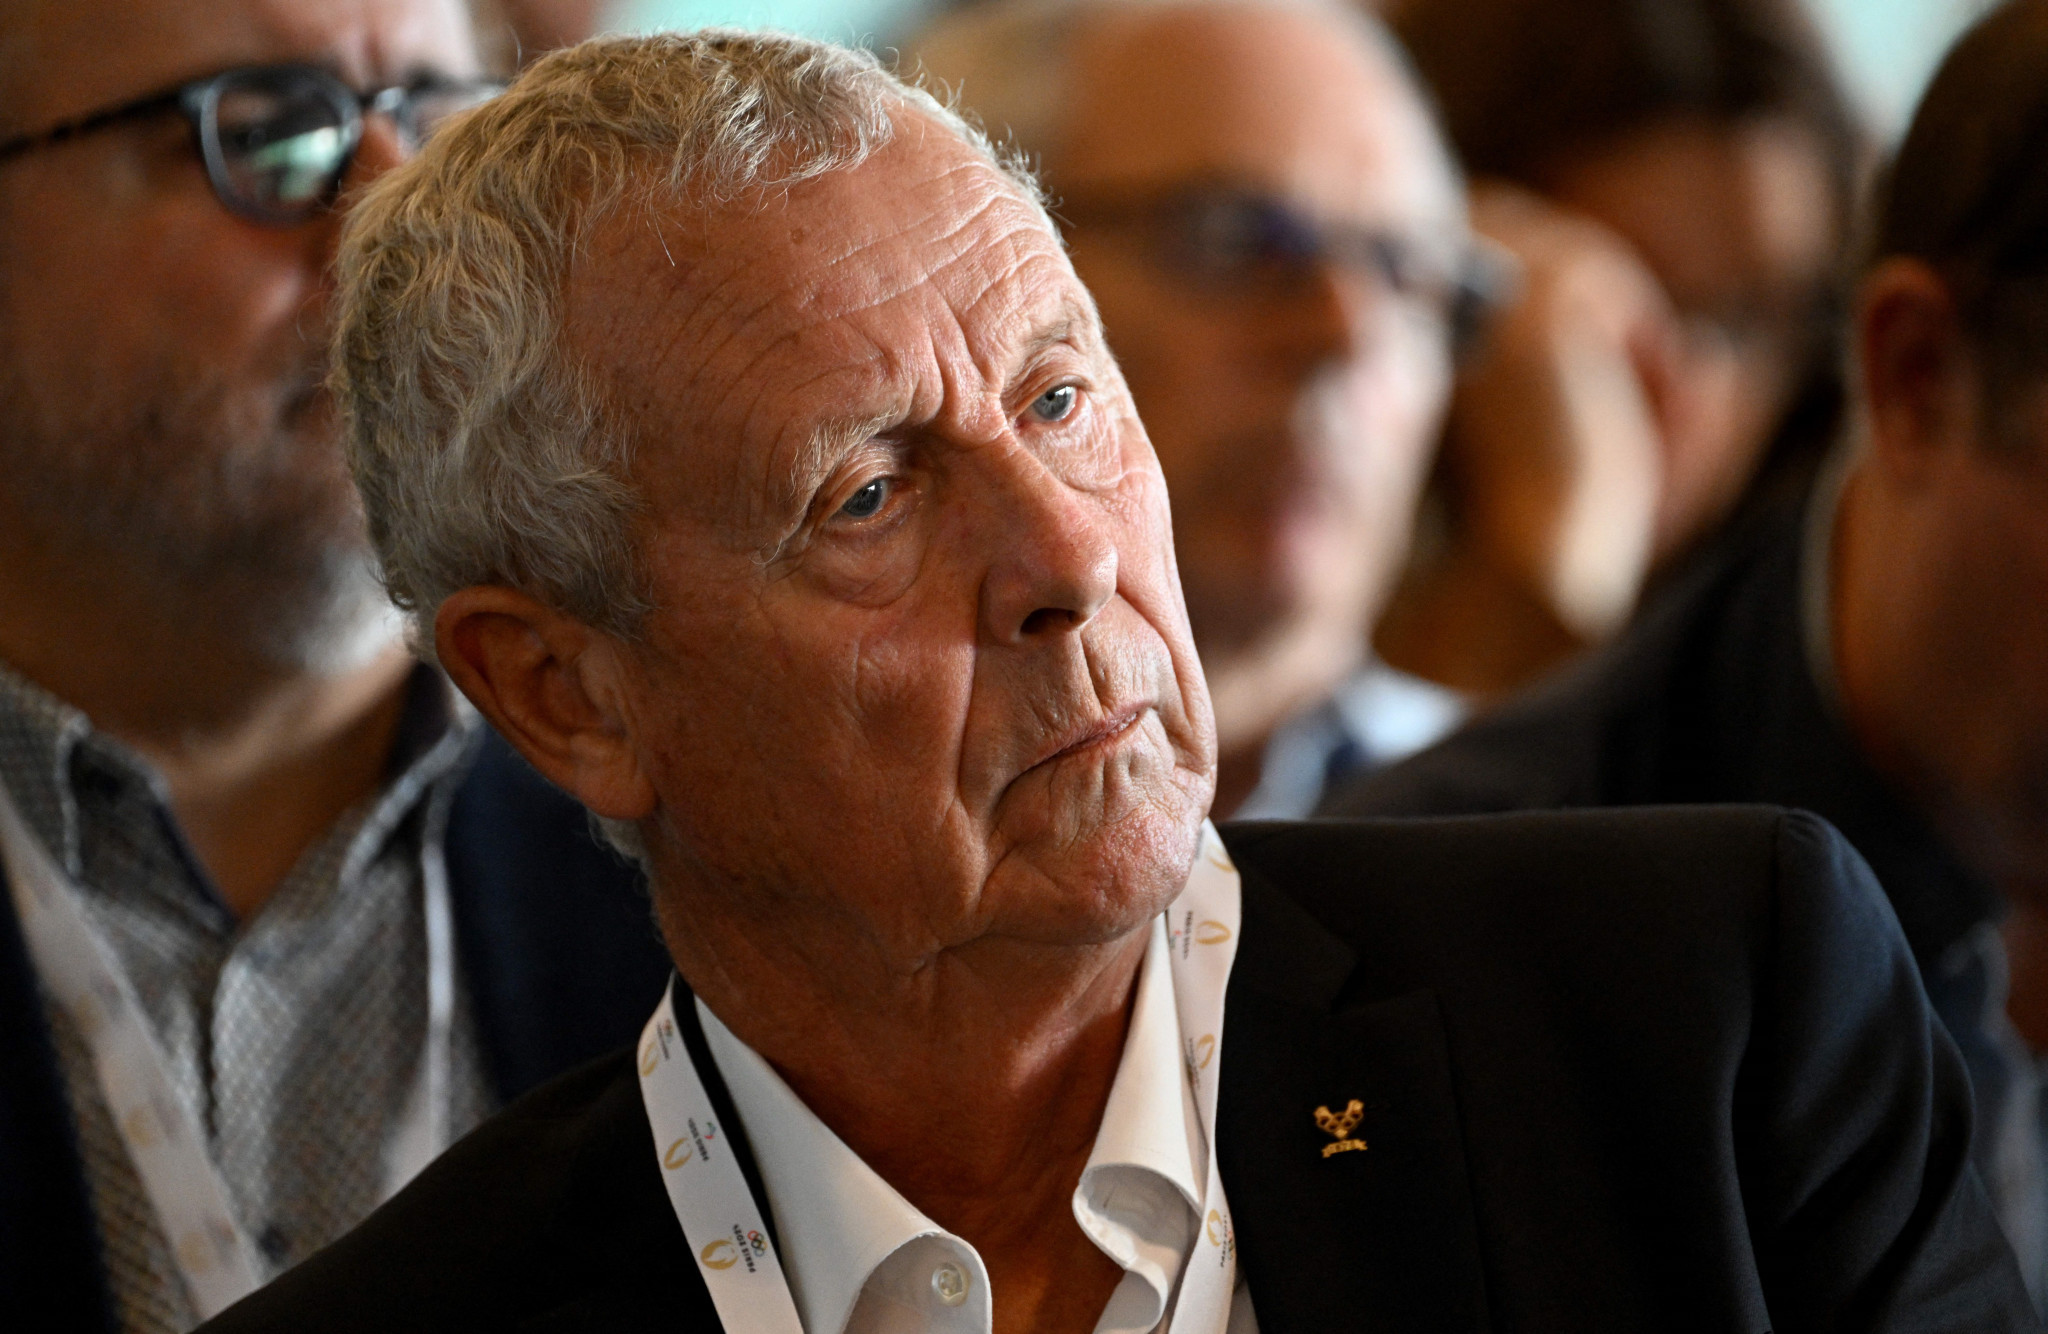 IOC member Drut says French NOC infighting is "serious" issue before Paris 2024